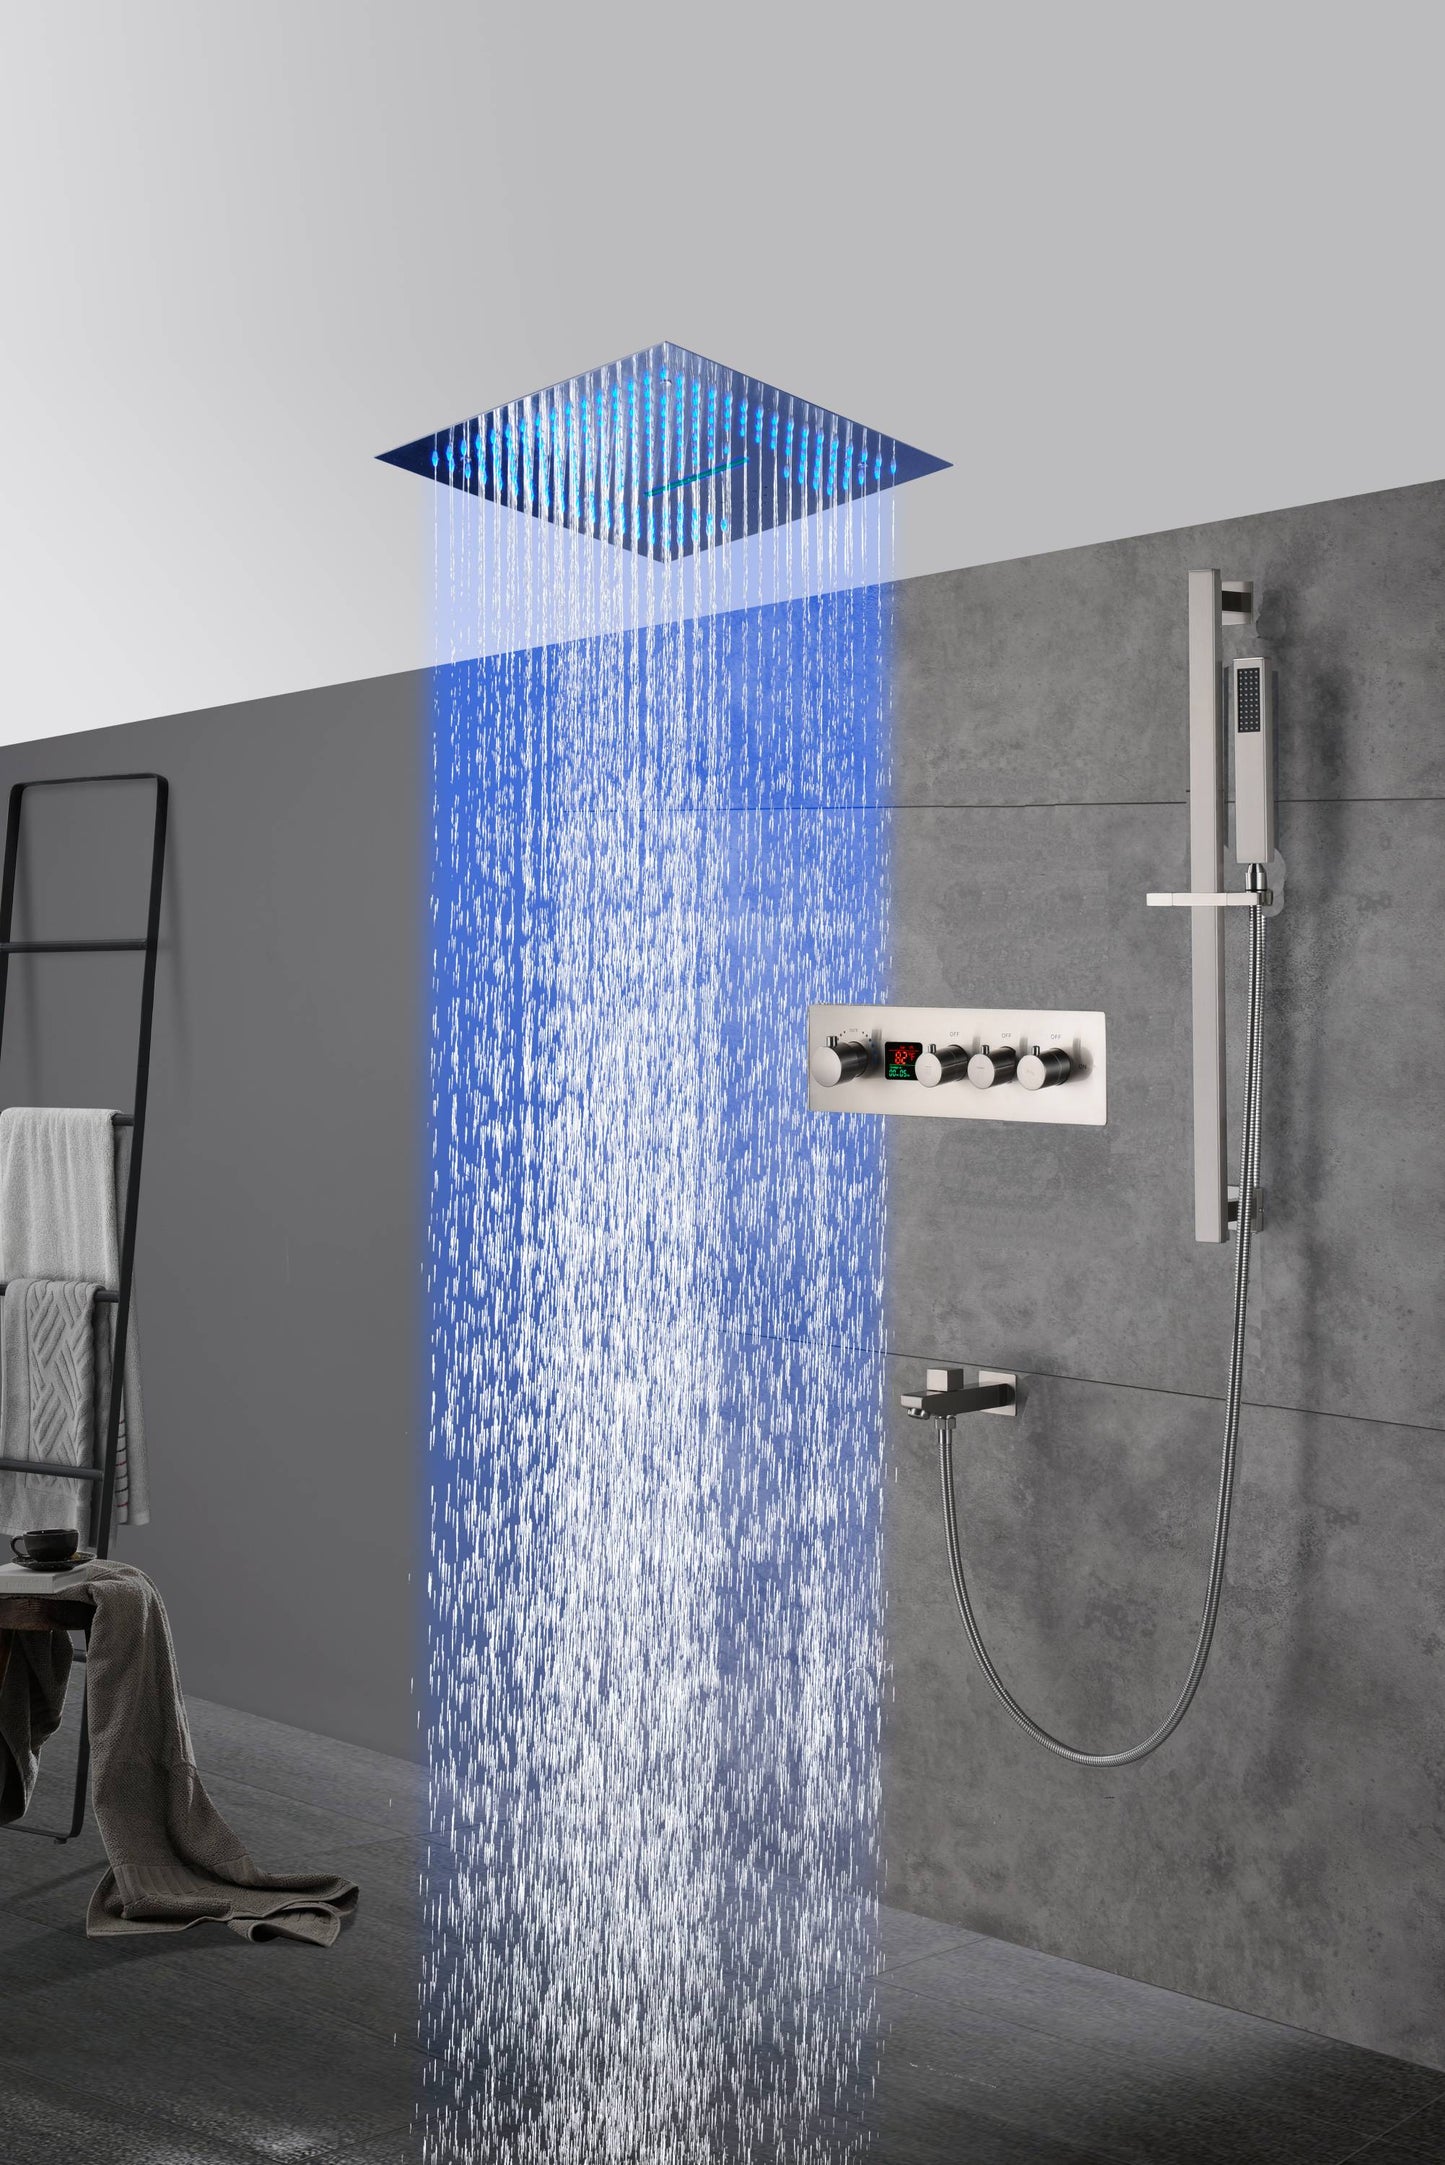 16-Inch Brushed Nickel Digital Thermostatic Shower System: 3-Way Control, Flush-Mounted, 64-Color LED Lighting, Bluetooth Music, Rainfall & Waterfall Features